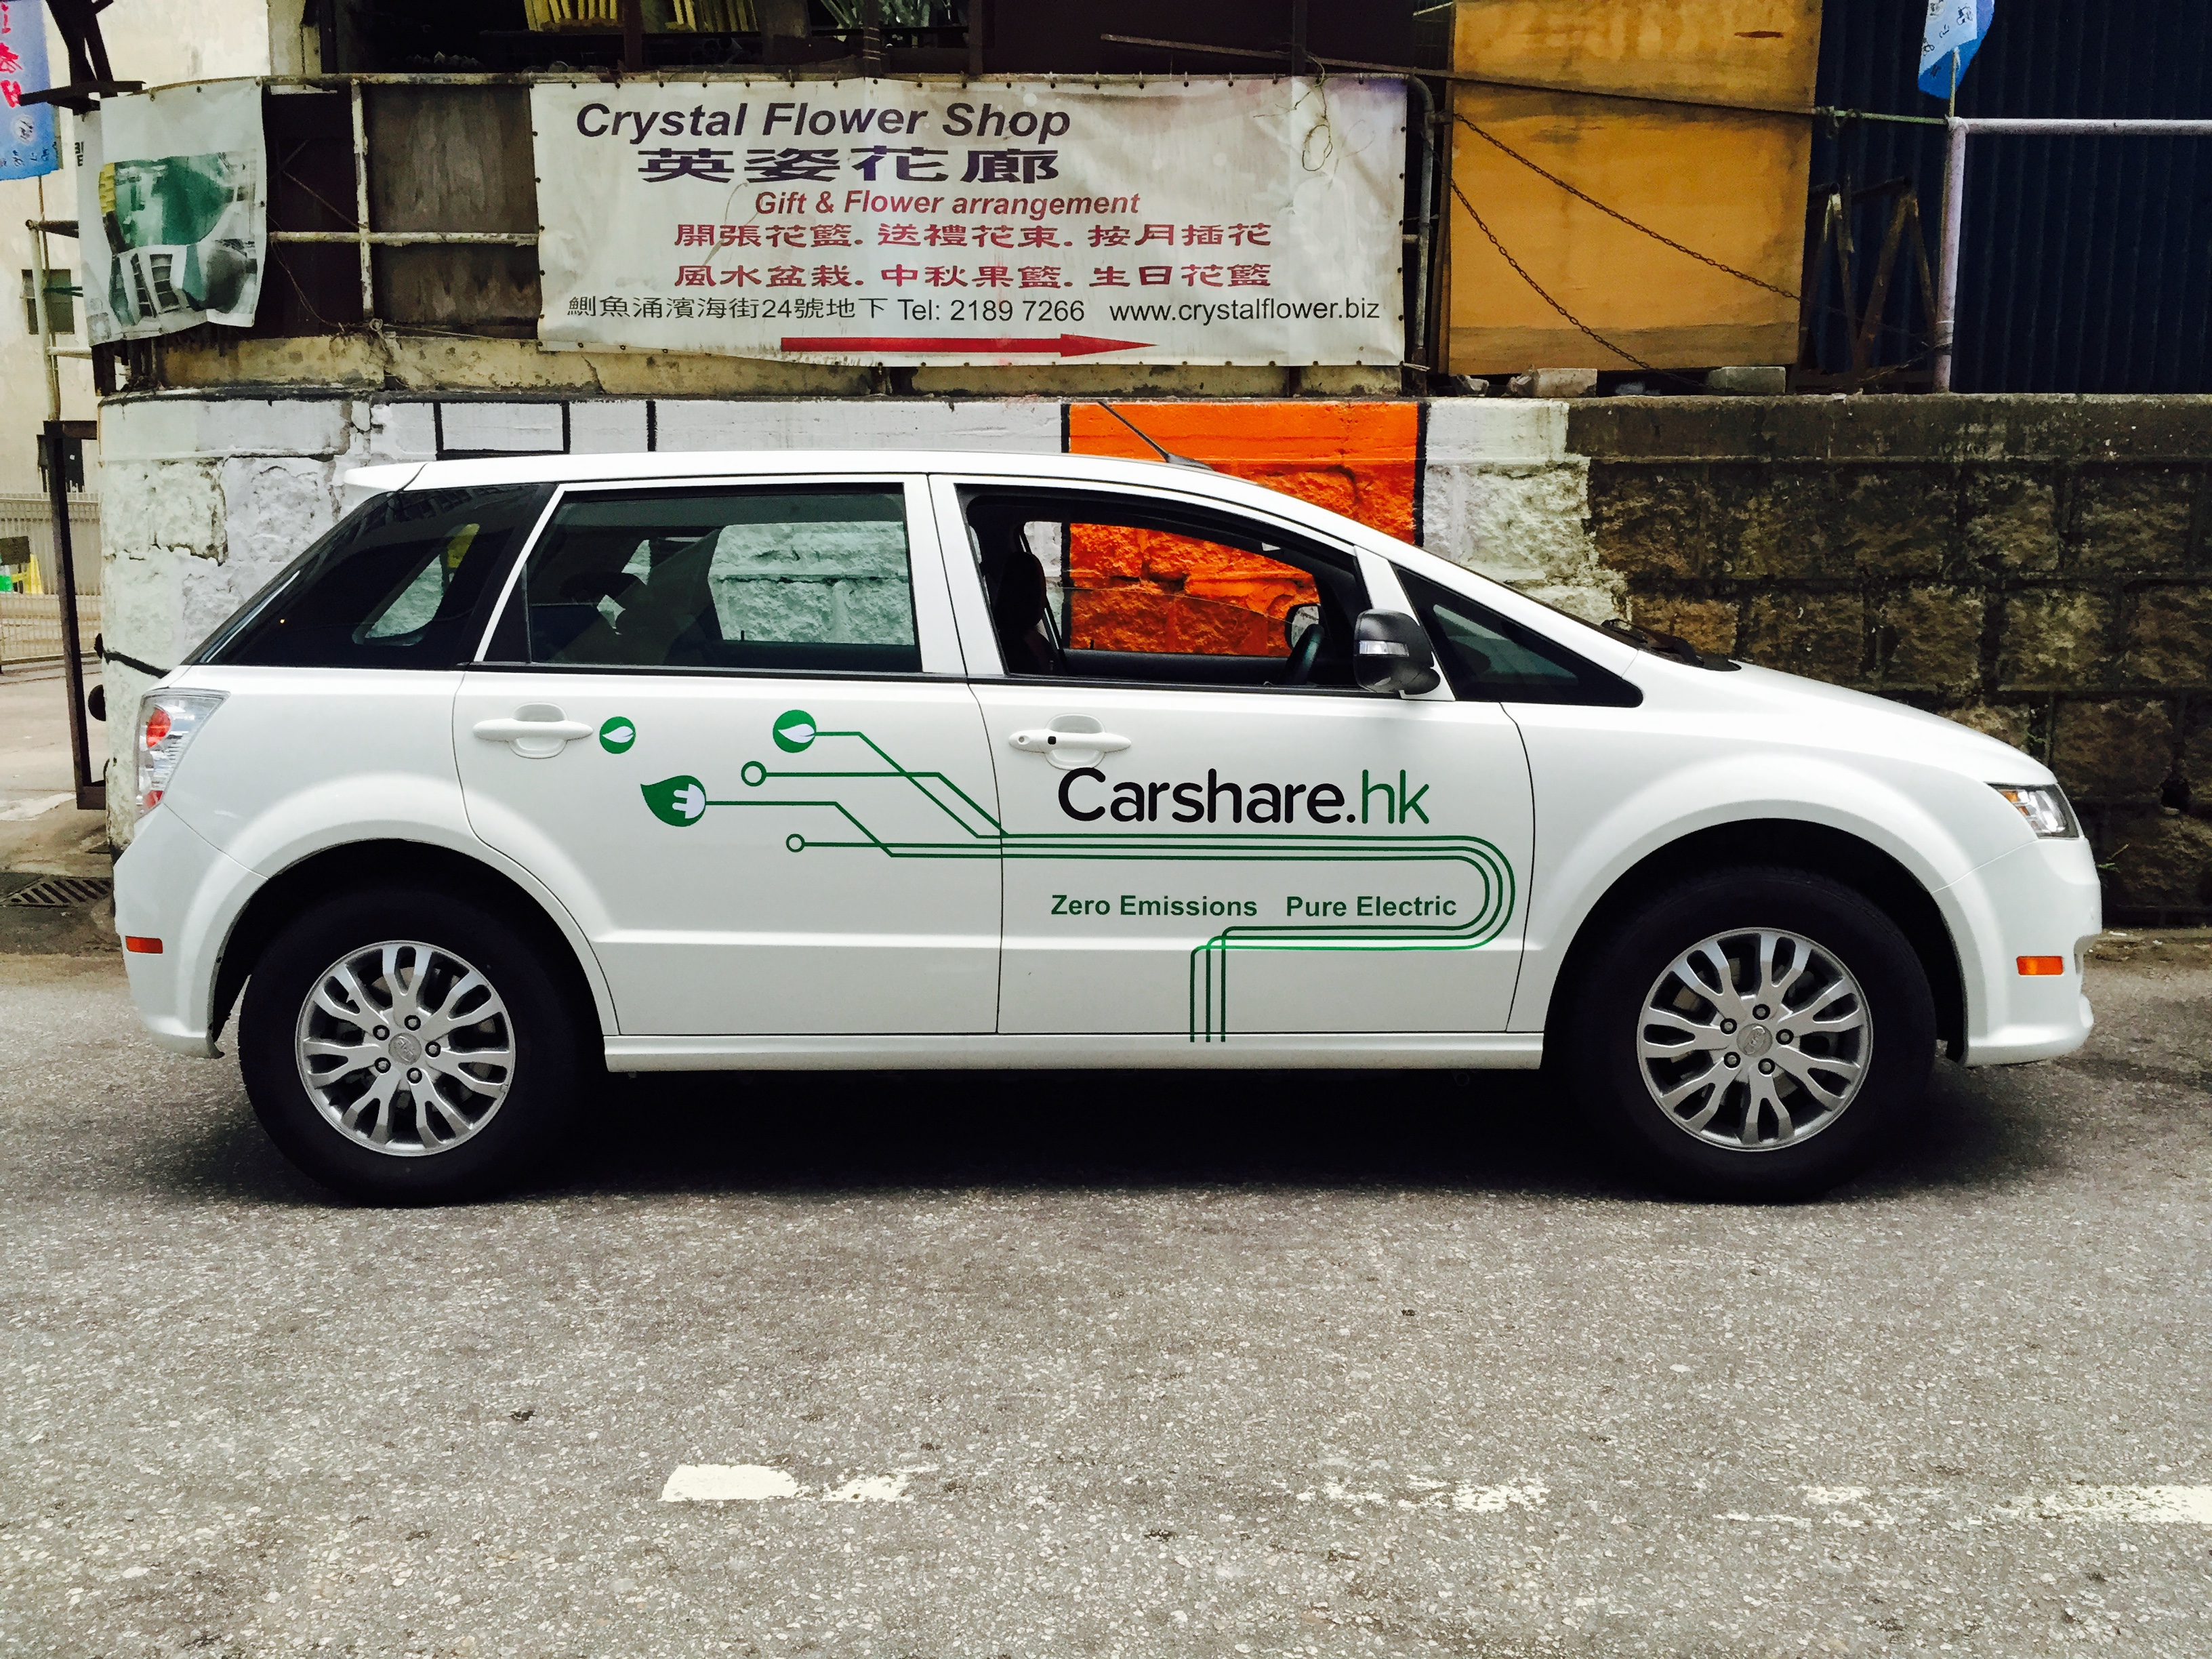 BYD's Electric vehicle (EV) can be rent with CarShare HK. [15APR2015 ONLINE]